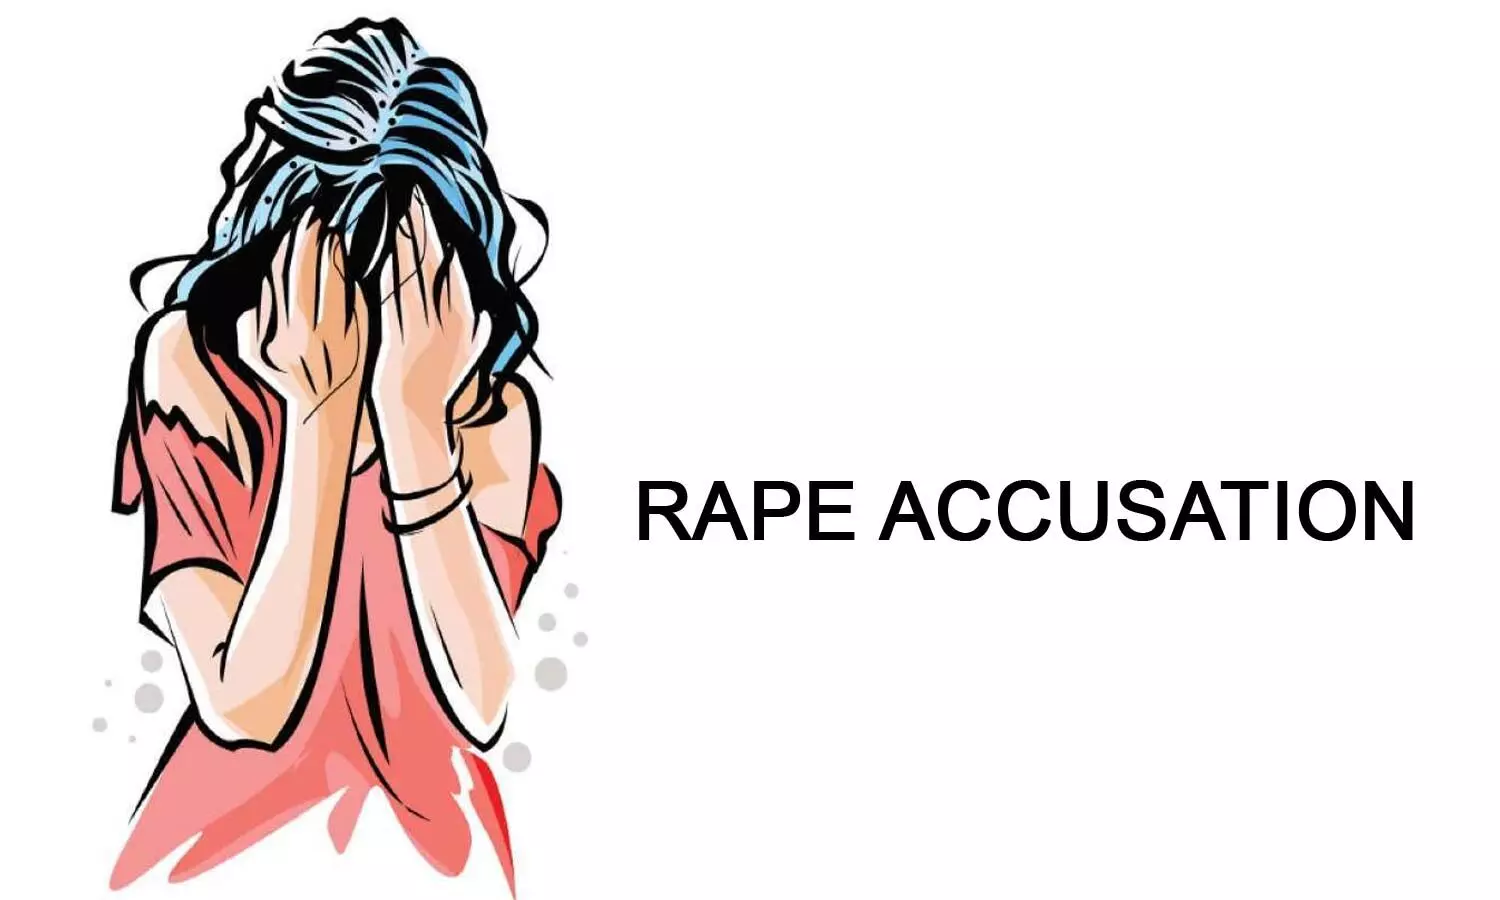 Kerala: Mentally retarded woman allegedly raped in Govt Medical College Hospital premises